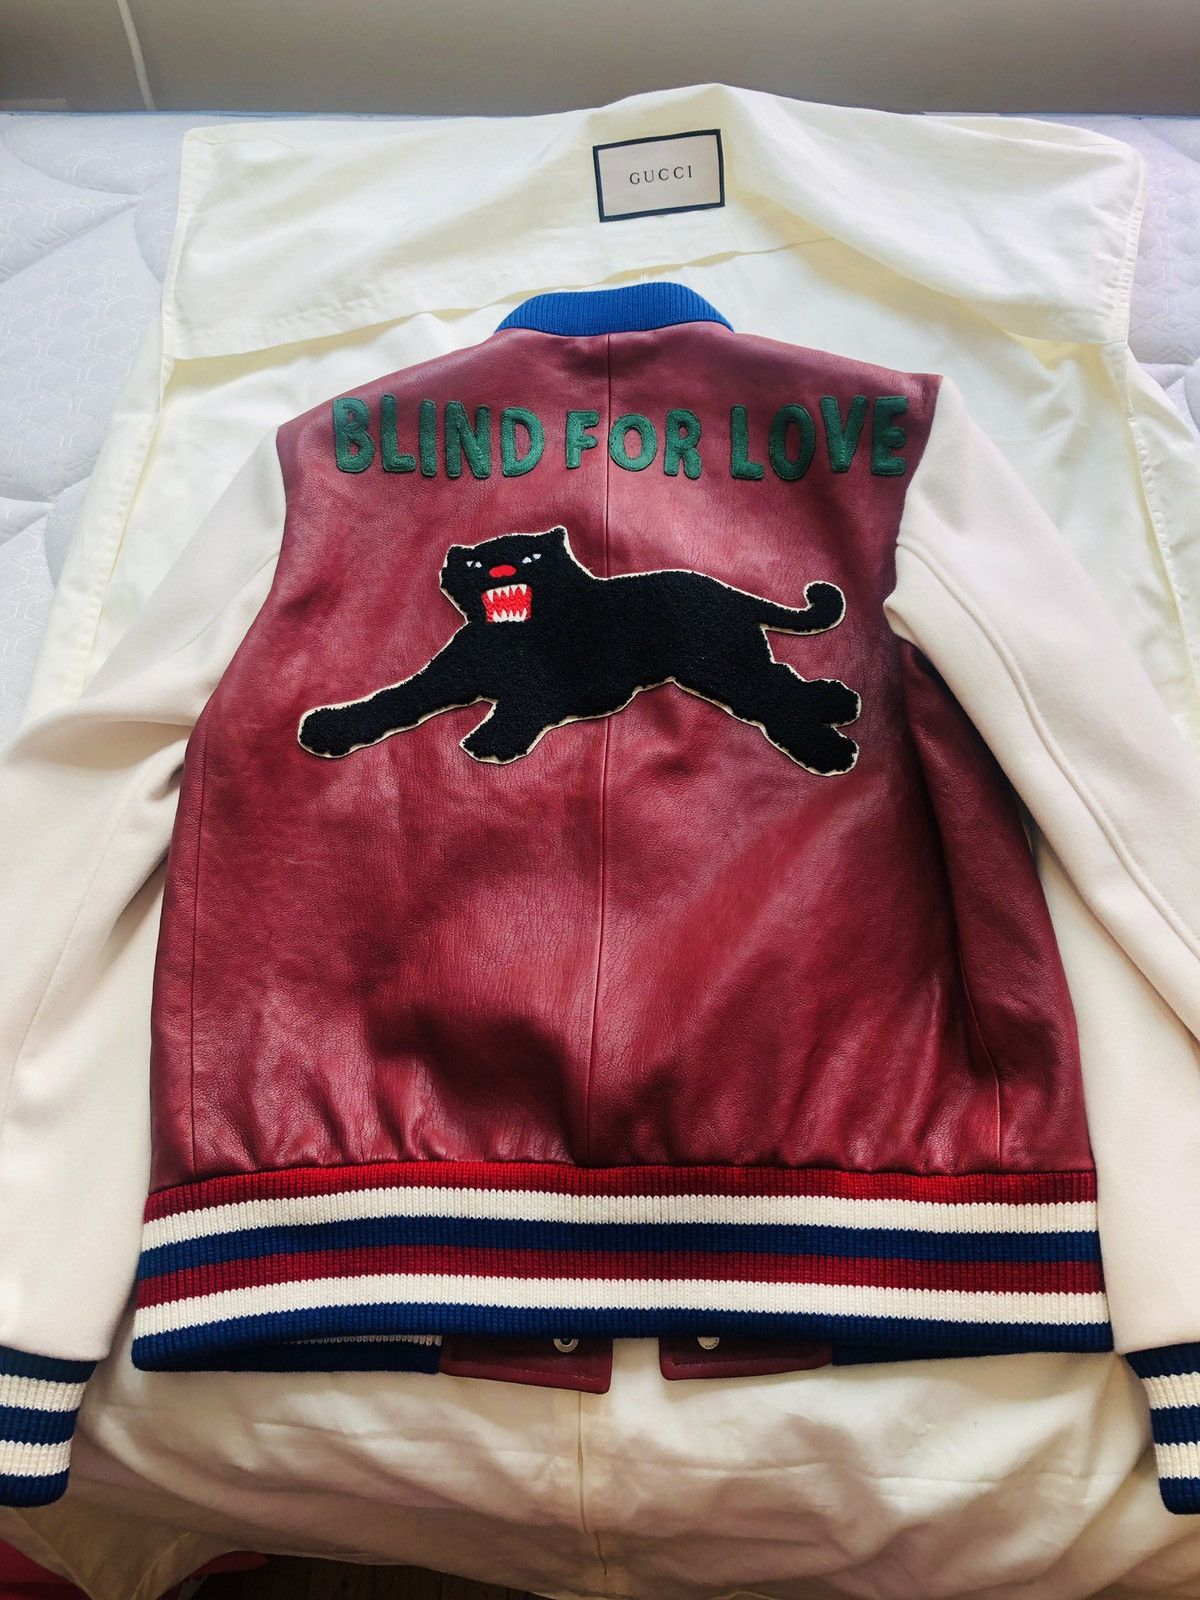 Gucci Blind For Love Varsity Bomber Jacket Size US S / EU 44-46 / 1 - 1 Preview